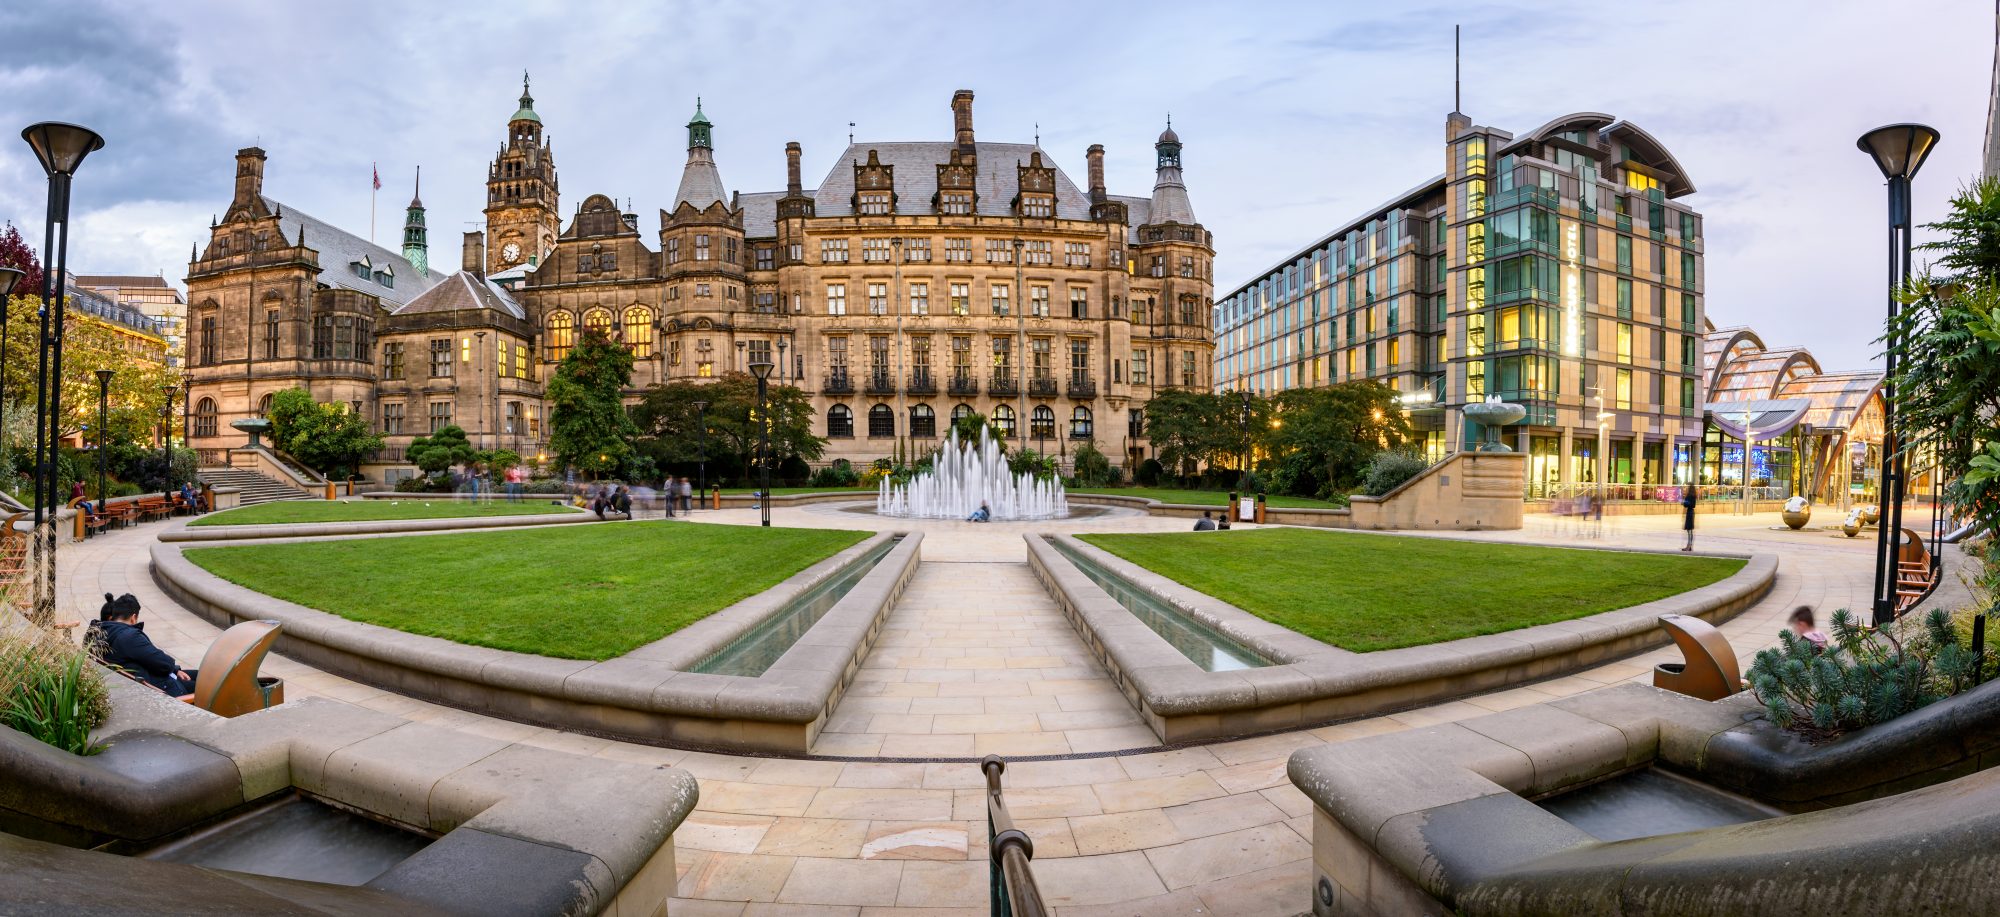 Wide shot of both old and modern buildings around a fountain in central Sheffield